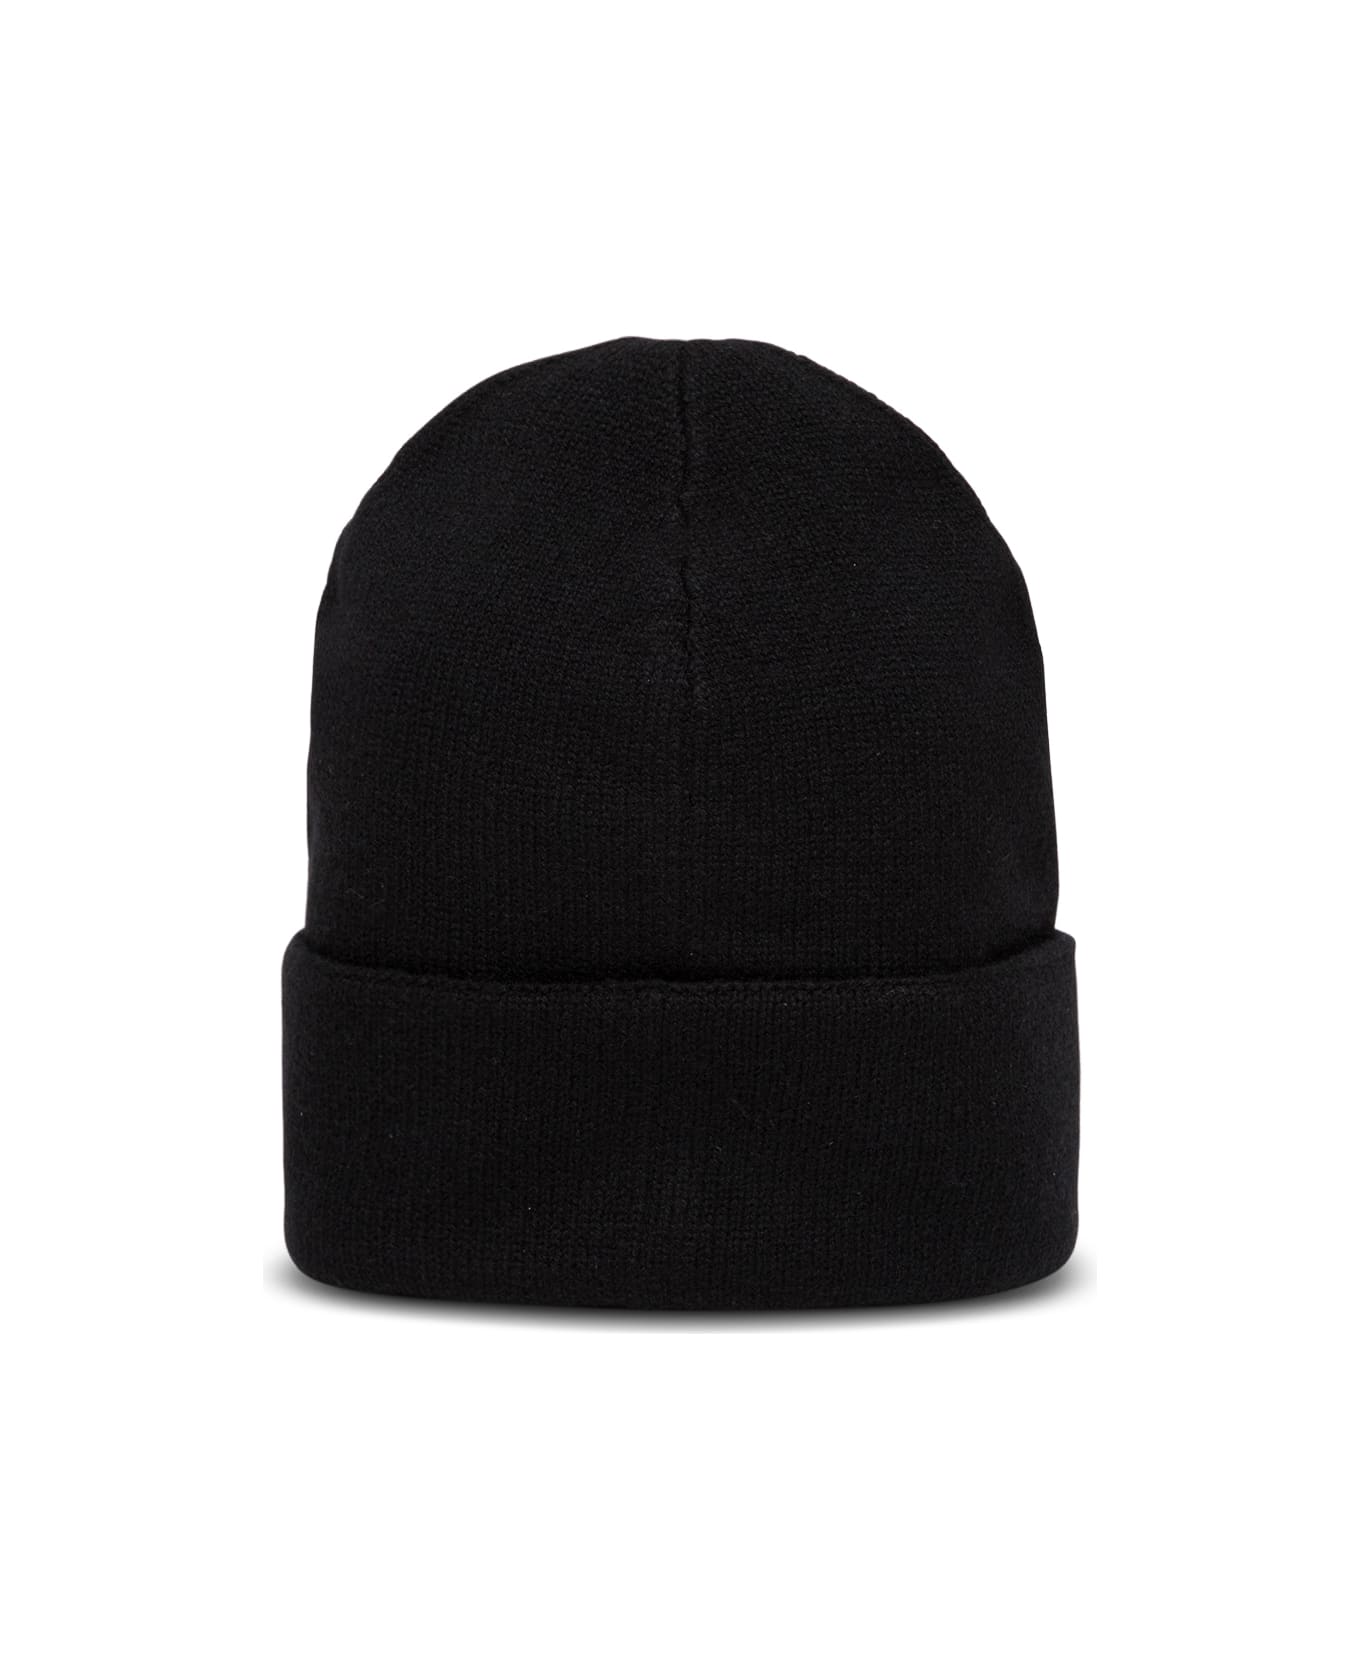 Alexander McQueen Black Wool And Cashmere Hat With Logo - Black